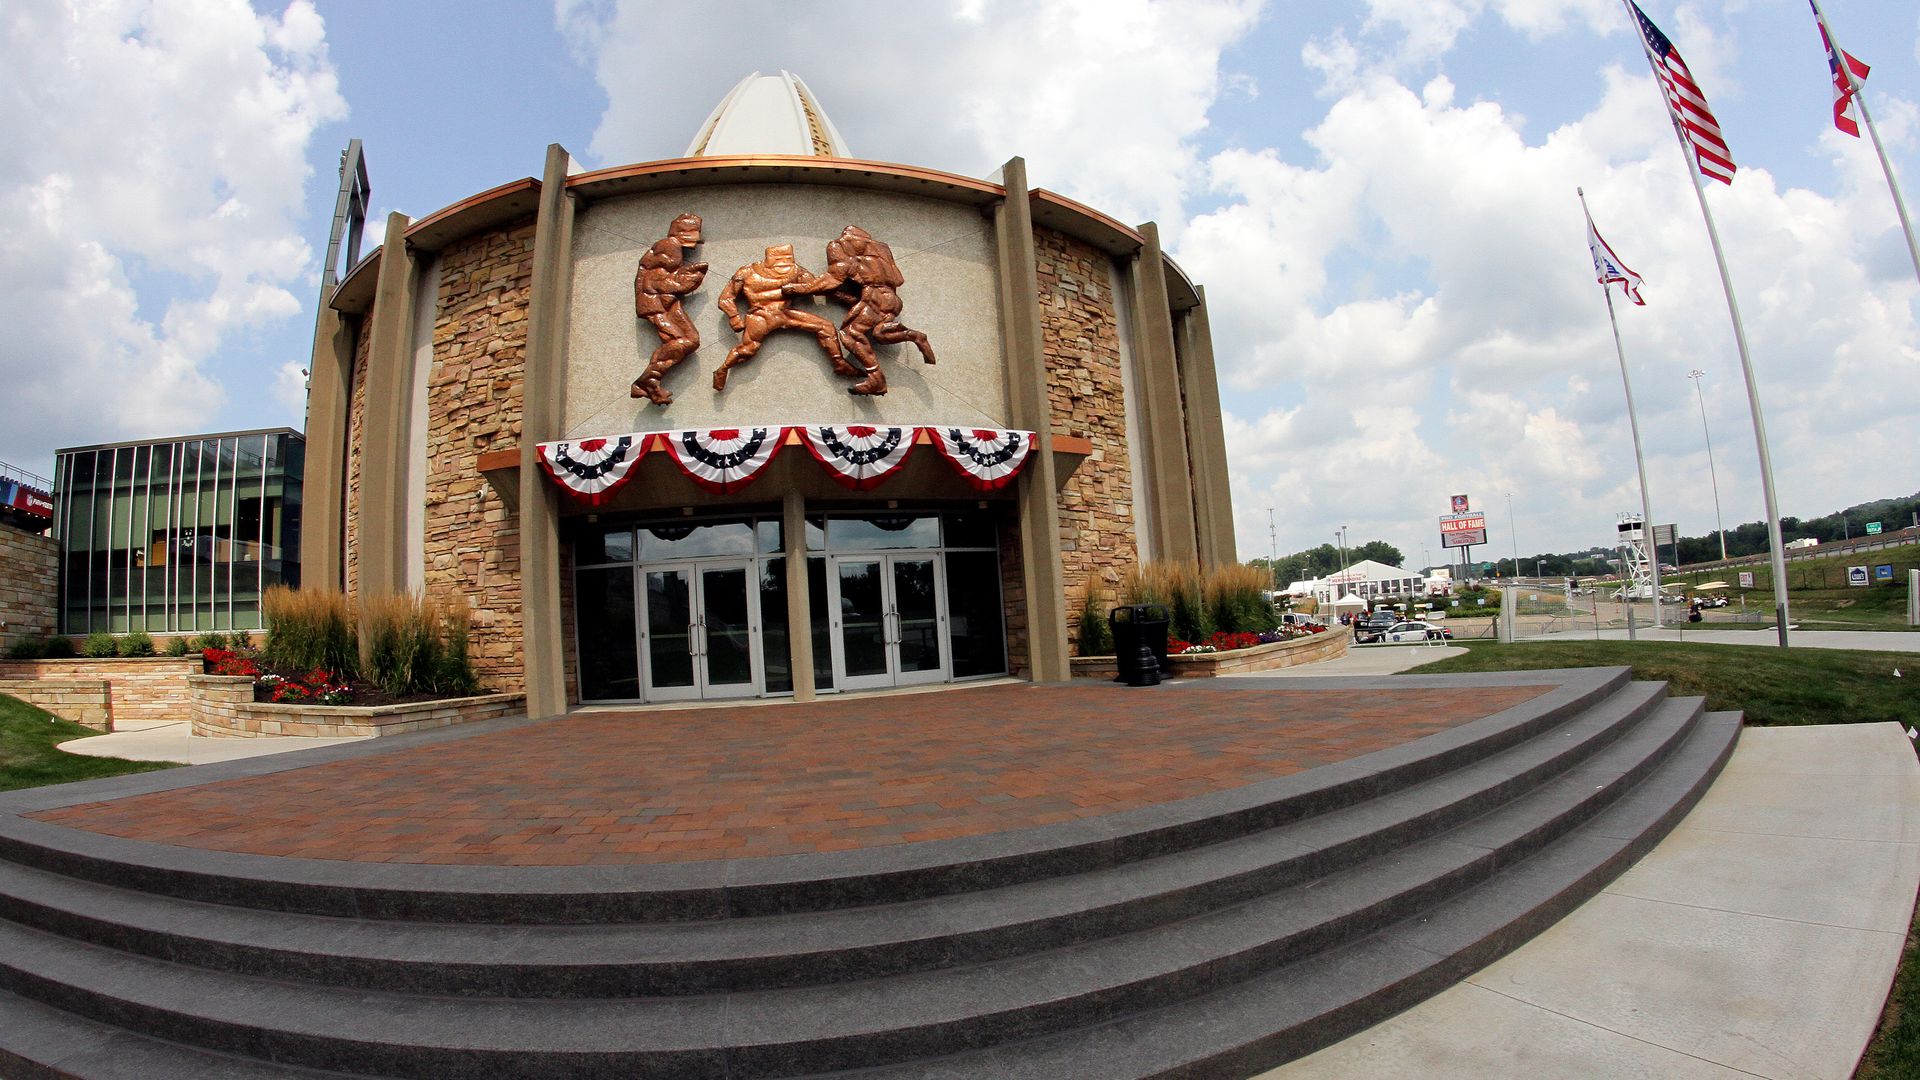 A general view of the Pro Football Hall of Fame Museum on August 04, 2018, at Tom Benson Hall Of Fame Stadium in Canton, Ohio. (Photo by Daniel Kucin Jr./Icon Sportswire via Getty Images)